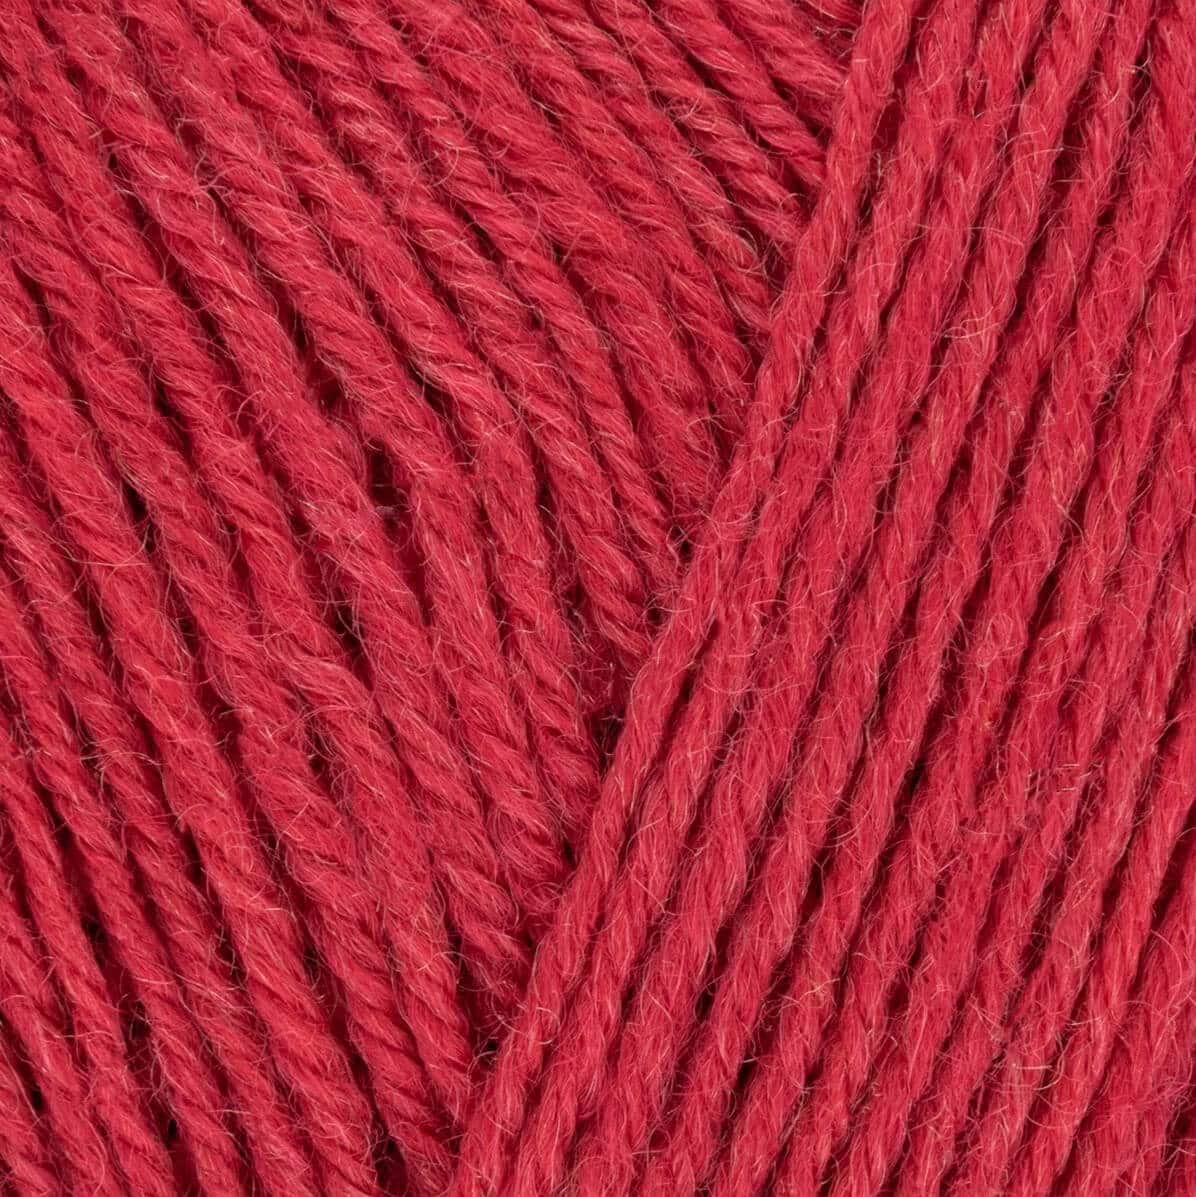 West Yorkshire Spinners Signature 4ply - Cherry Drop 529